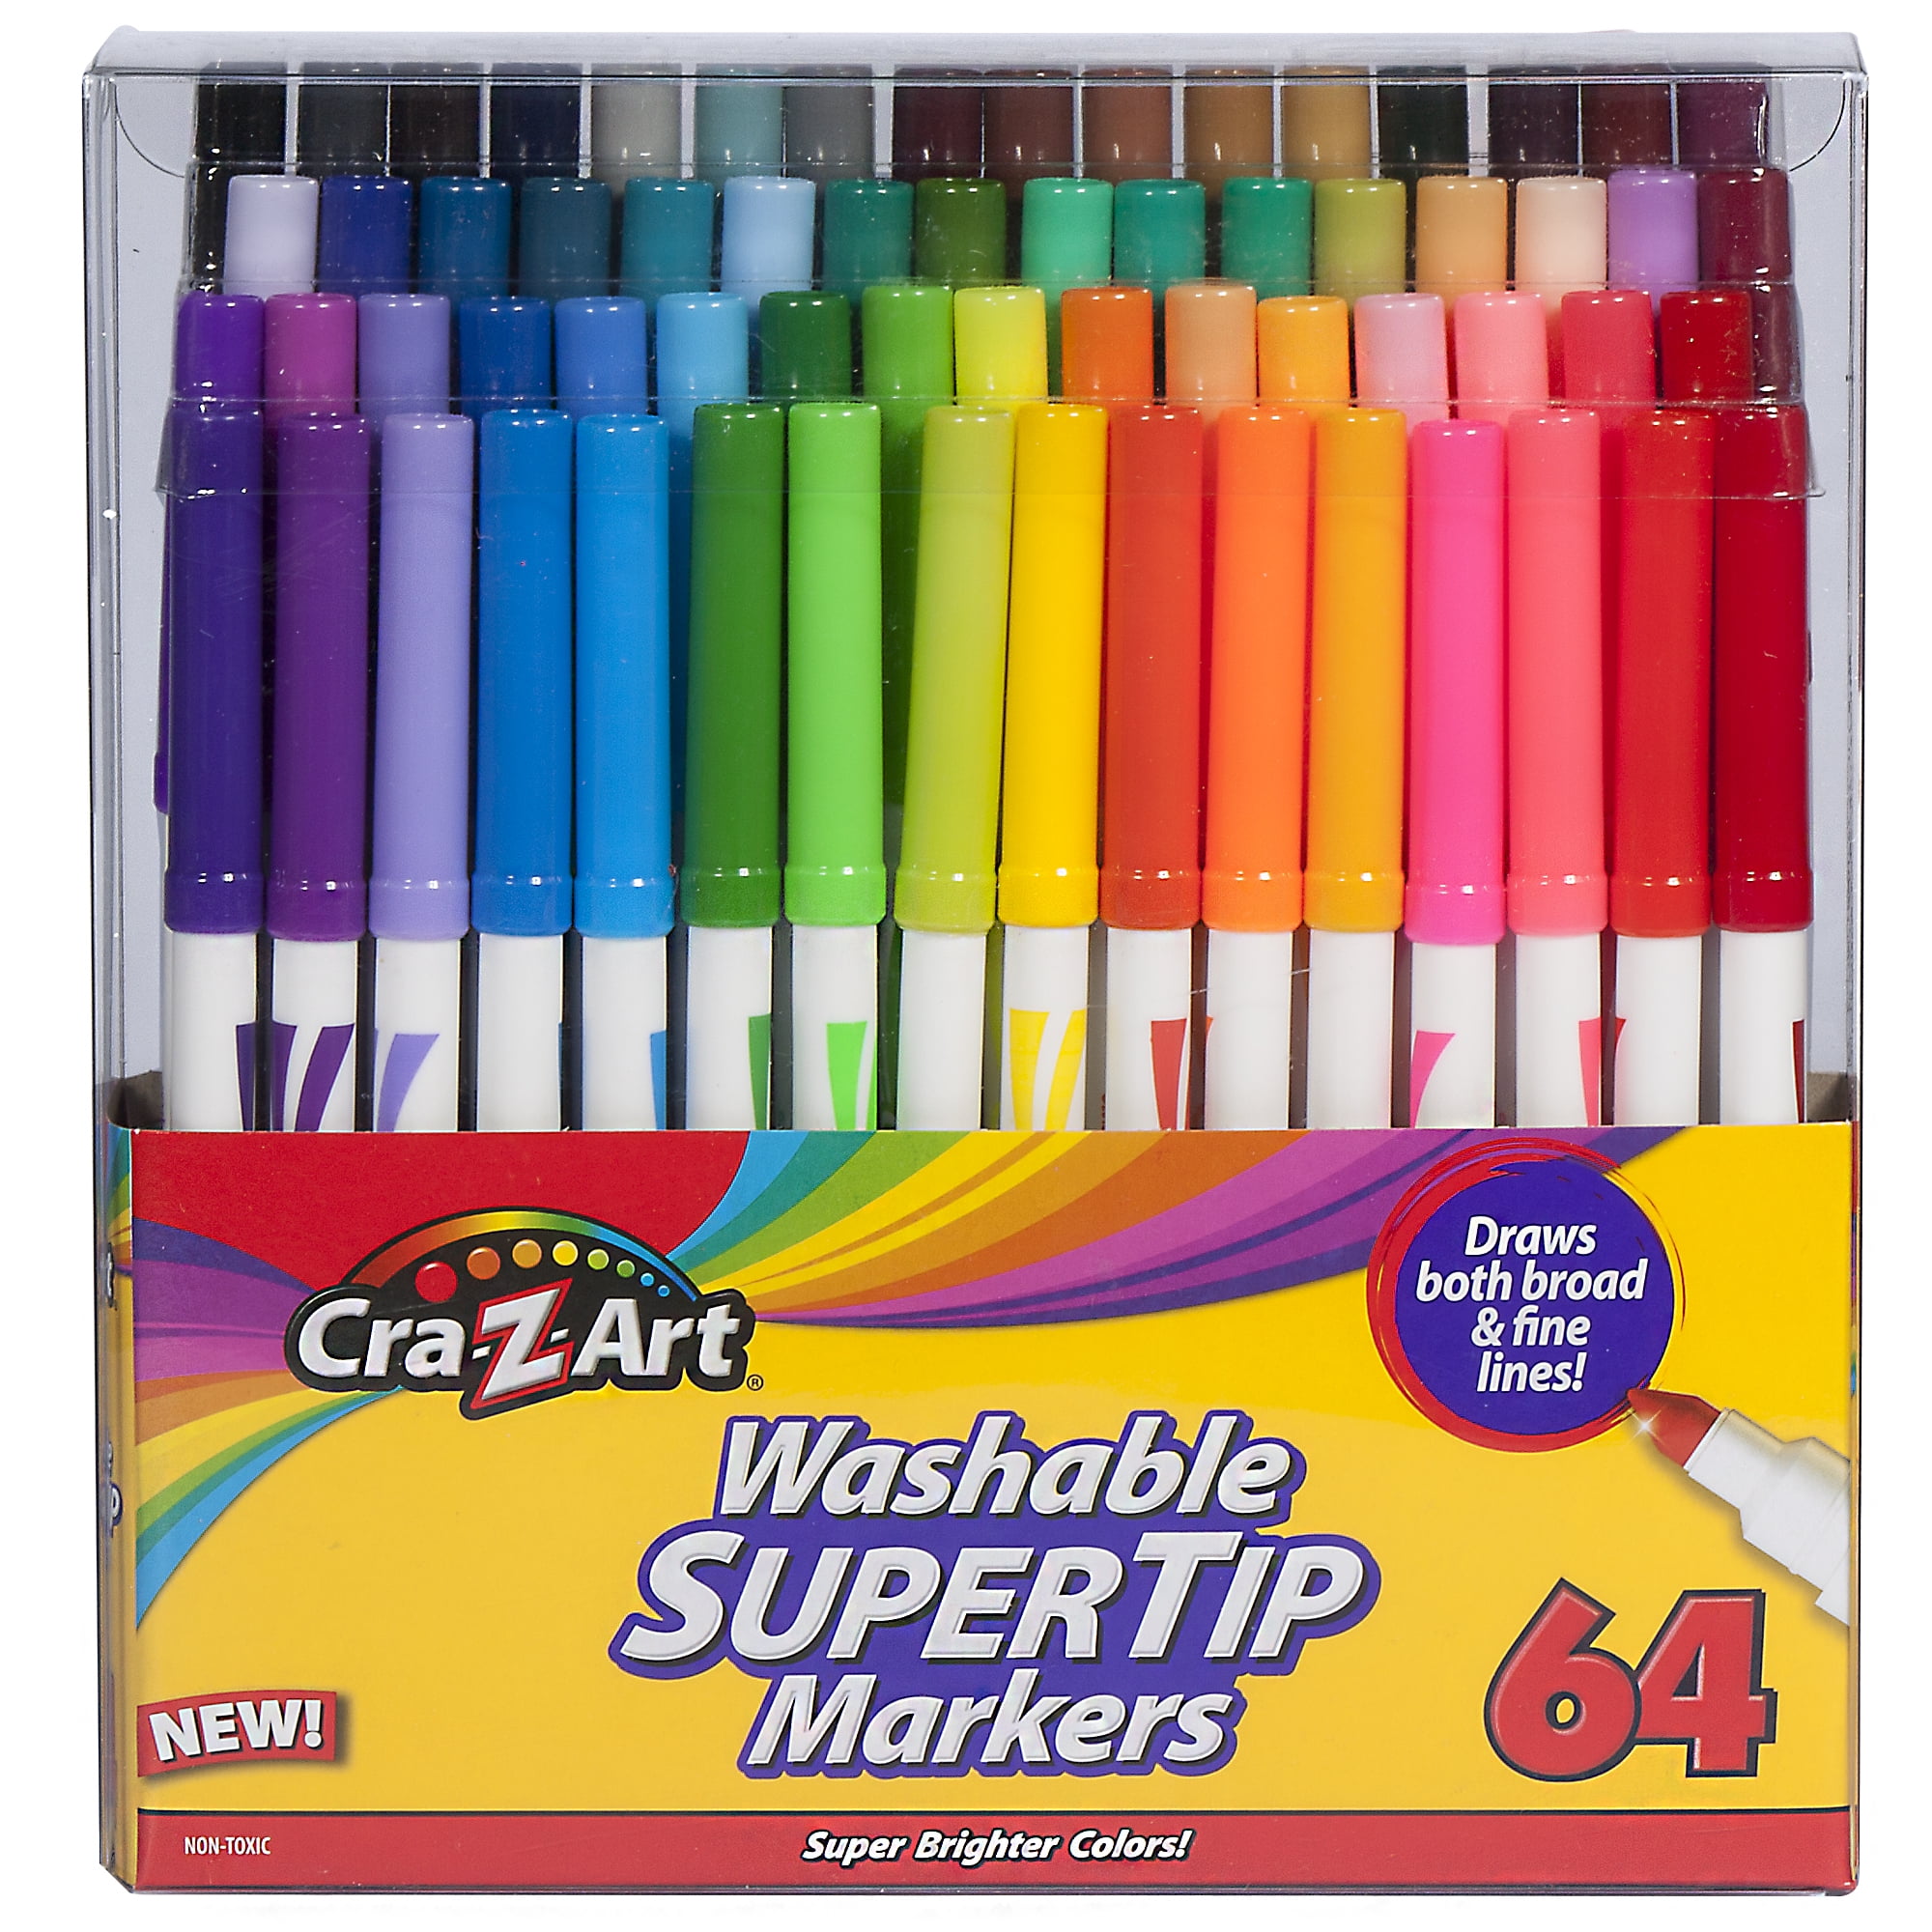 Basics Supertip 40 Colors Washable Markers, Pack of 40, Multicolored